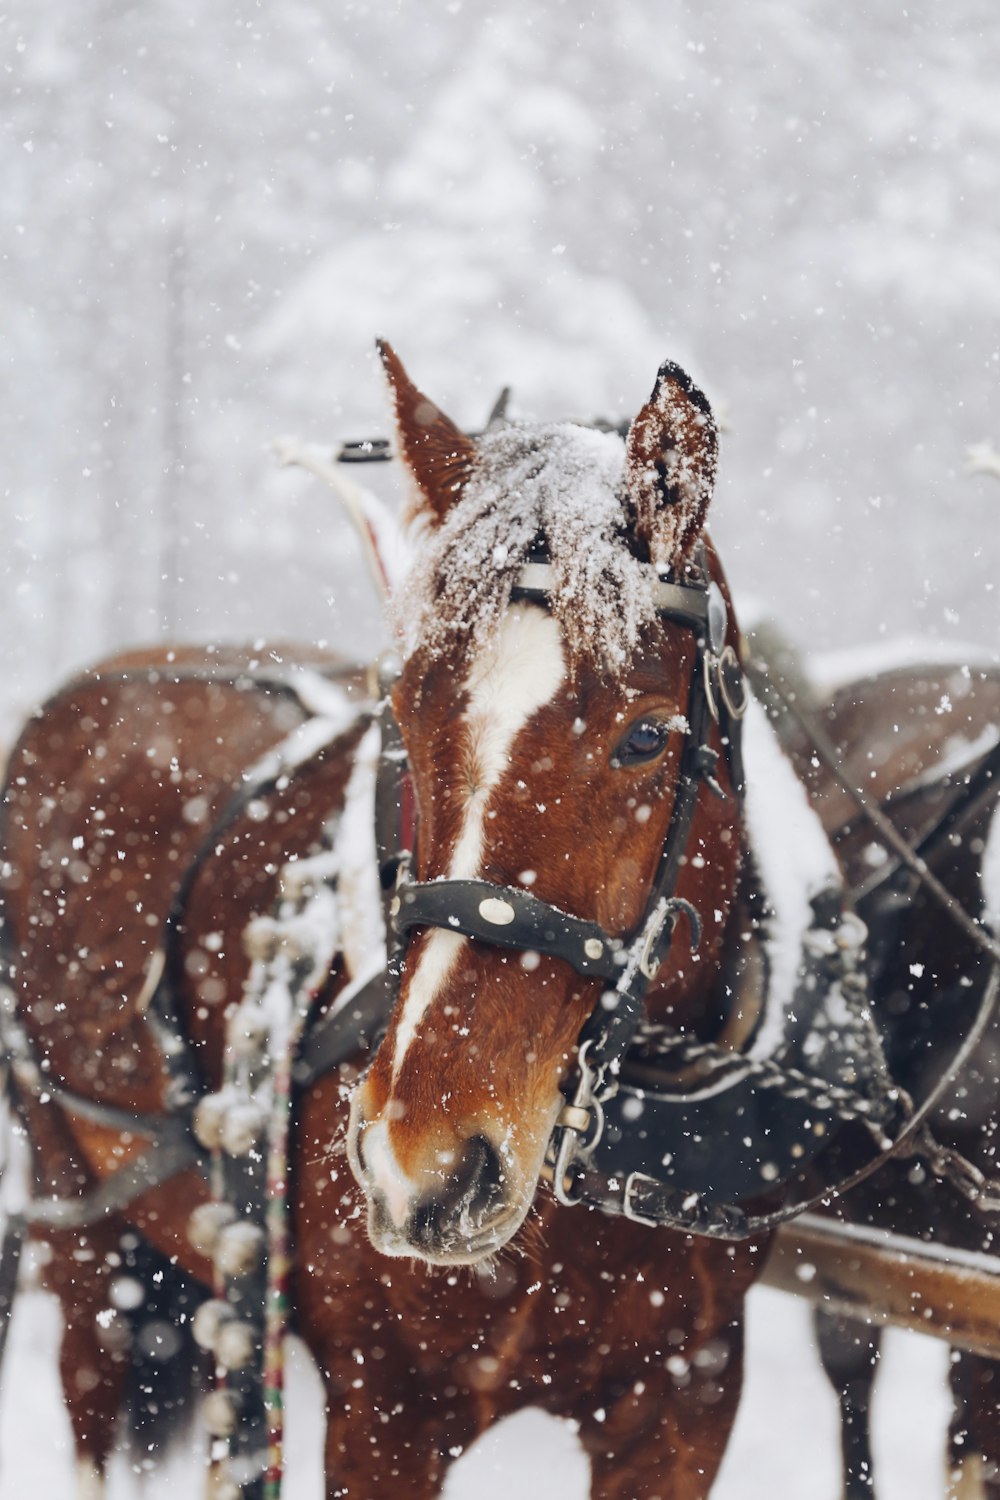 Horse Snow Picture. Download Free